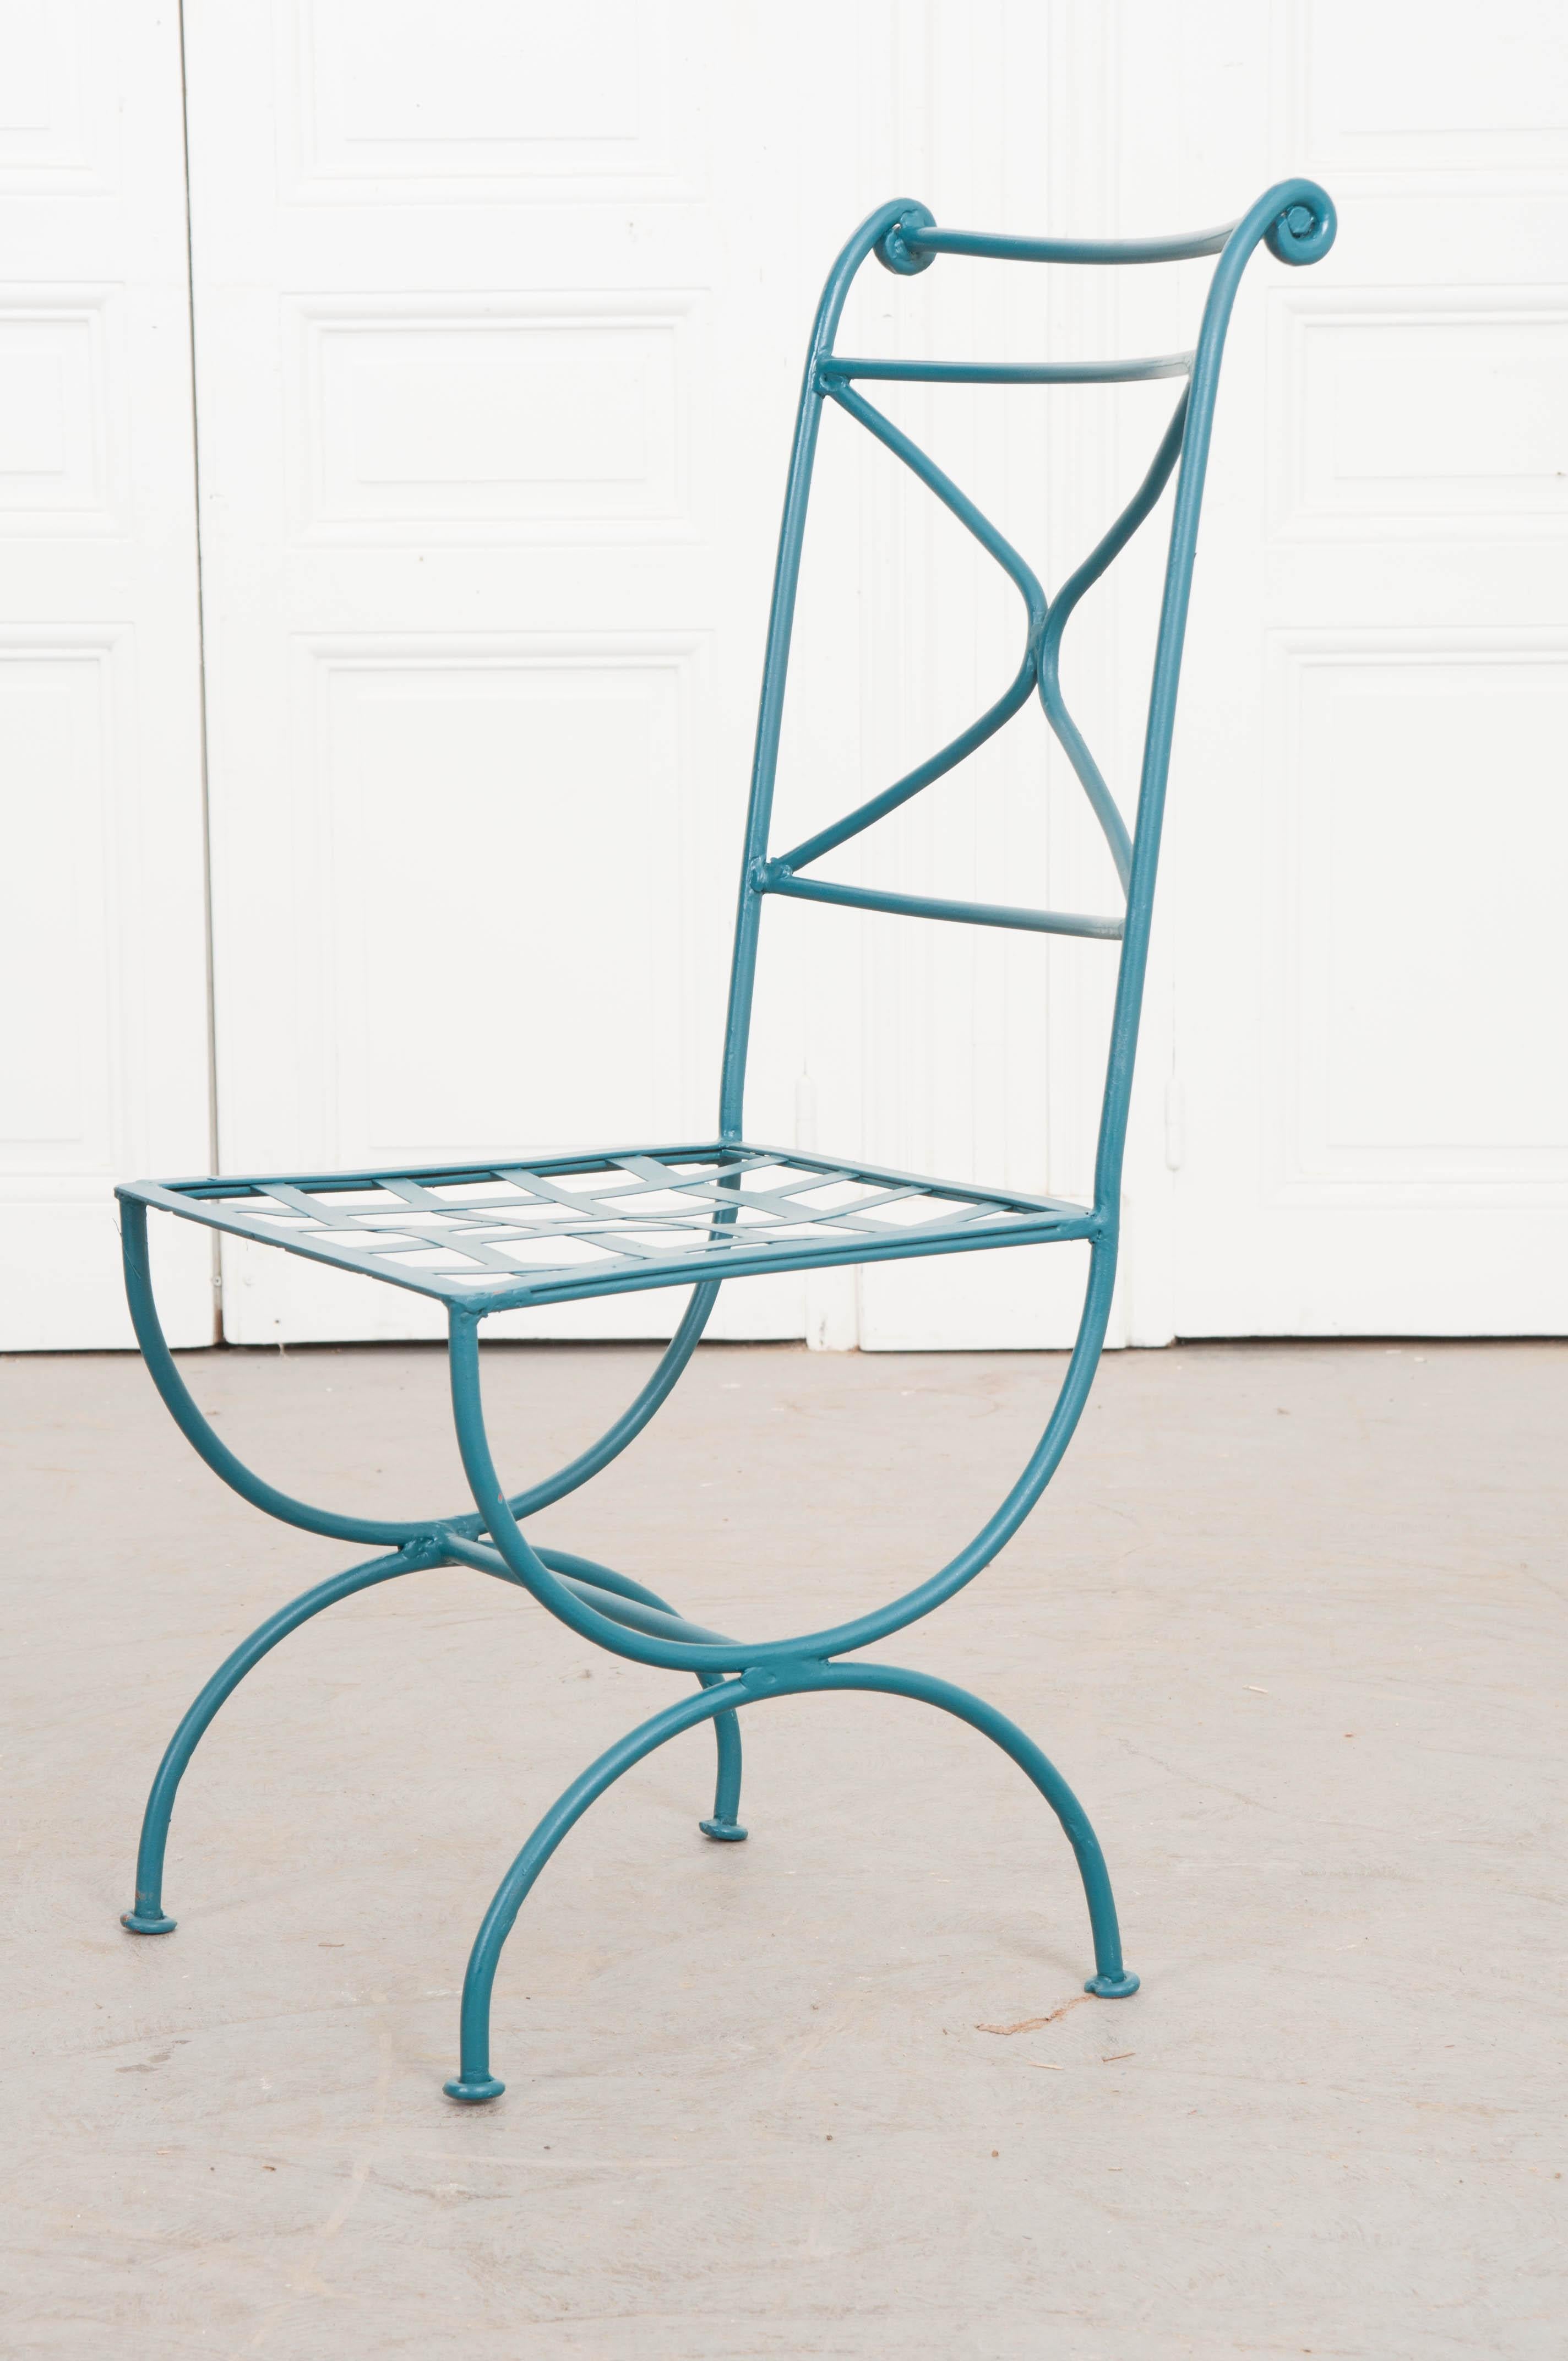 This elegant suite of four verdigris-painted wrought iron side chairs, of the Classic Curule-form, are from France, circa 1900. The X-form chair-backs echo the Curule-style legs. Since they are made of wrought iron, these chairs would work